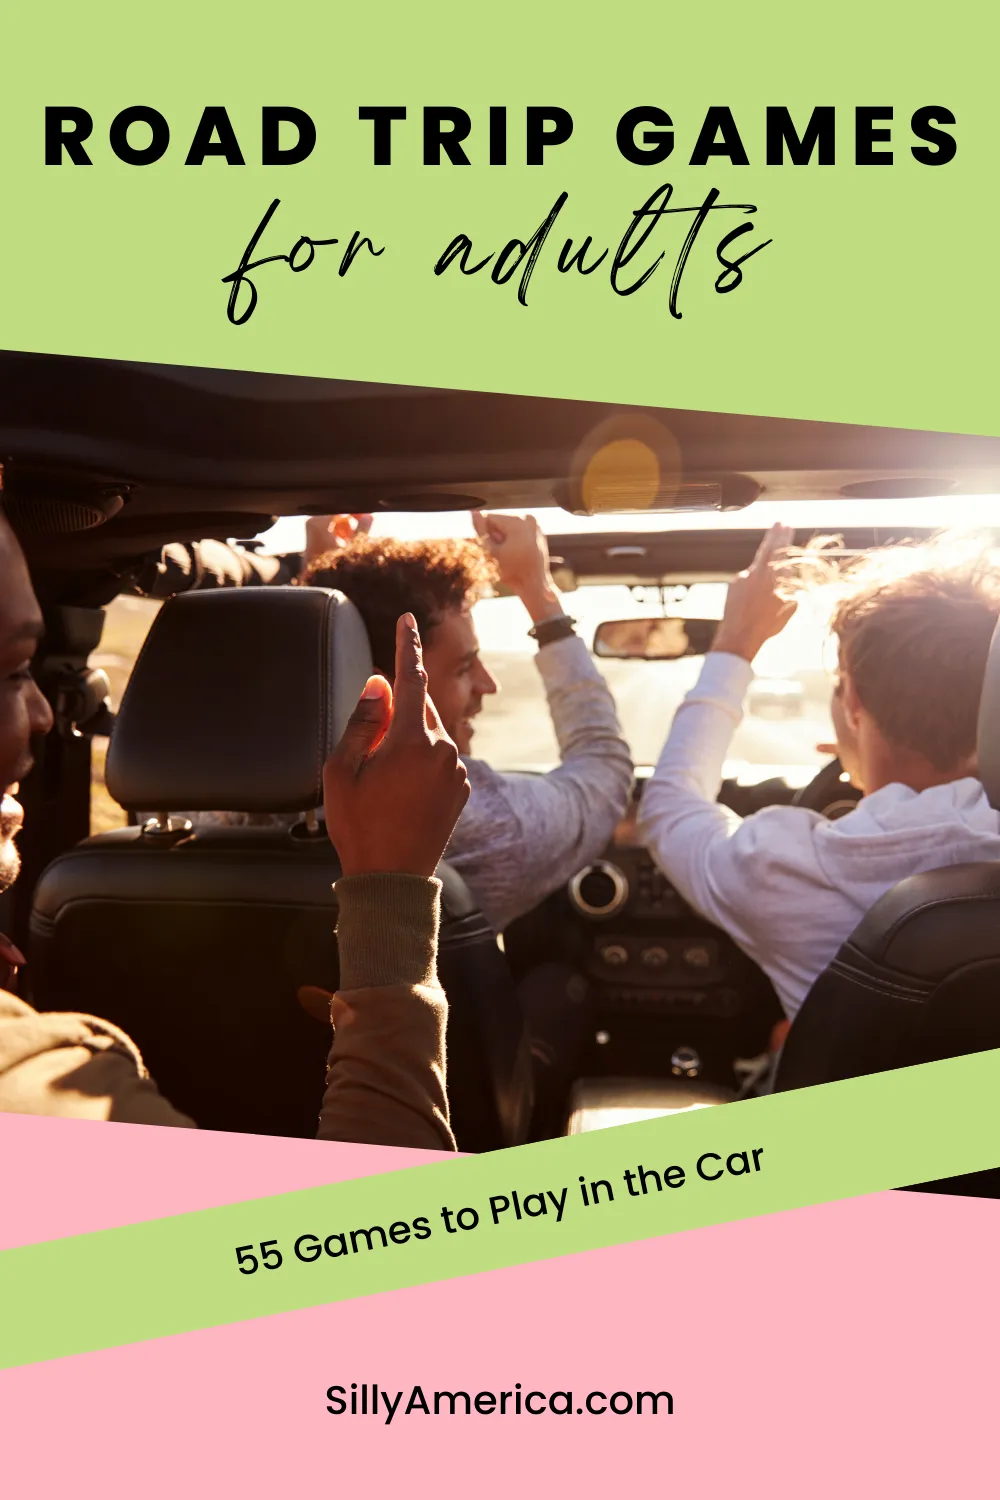 Road trips are full of fun, adventure, breathtaking landscapes, and weird roadside attractions. But sometimes they also involve long stretches of driving with nothing on your itinerary. In those cases, you might be looking for something to keep you entertained in the car. Enter these road trip games for adults. All of these game ideas are perfect for a road trip with friends or a couples trip. Most of them can even be enjoyed by the whole family. #RoadTrip #RoadTripGames #RoadTripGamesforAdults